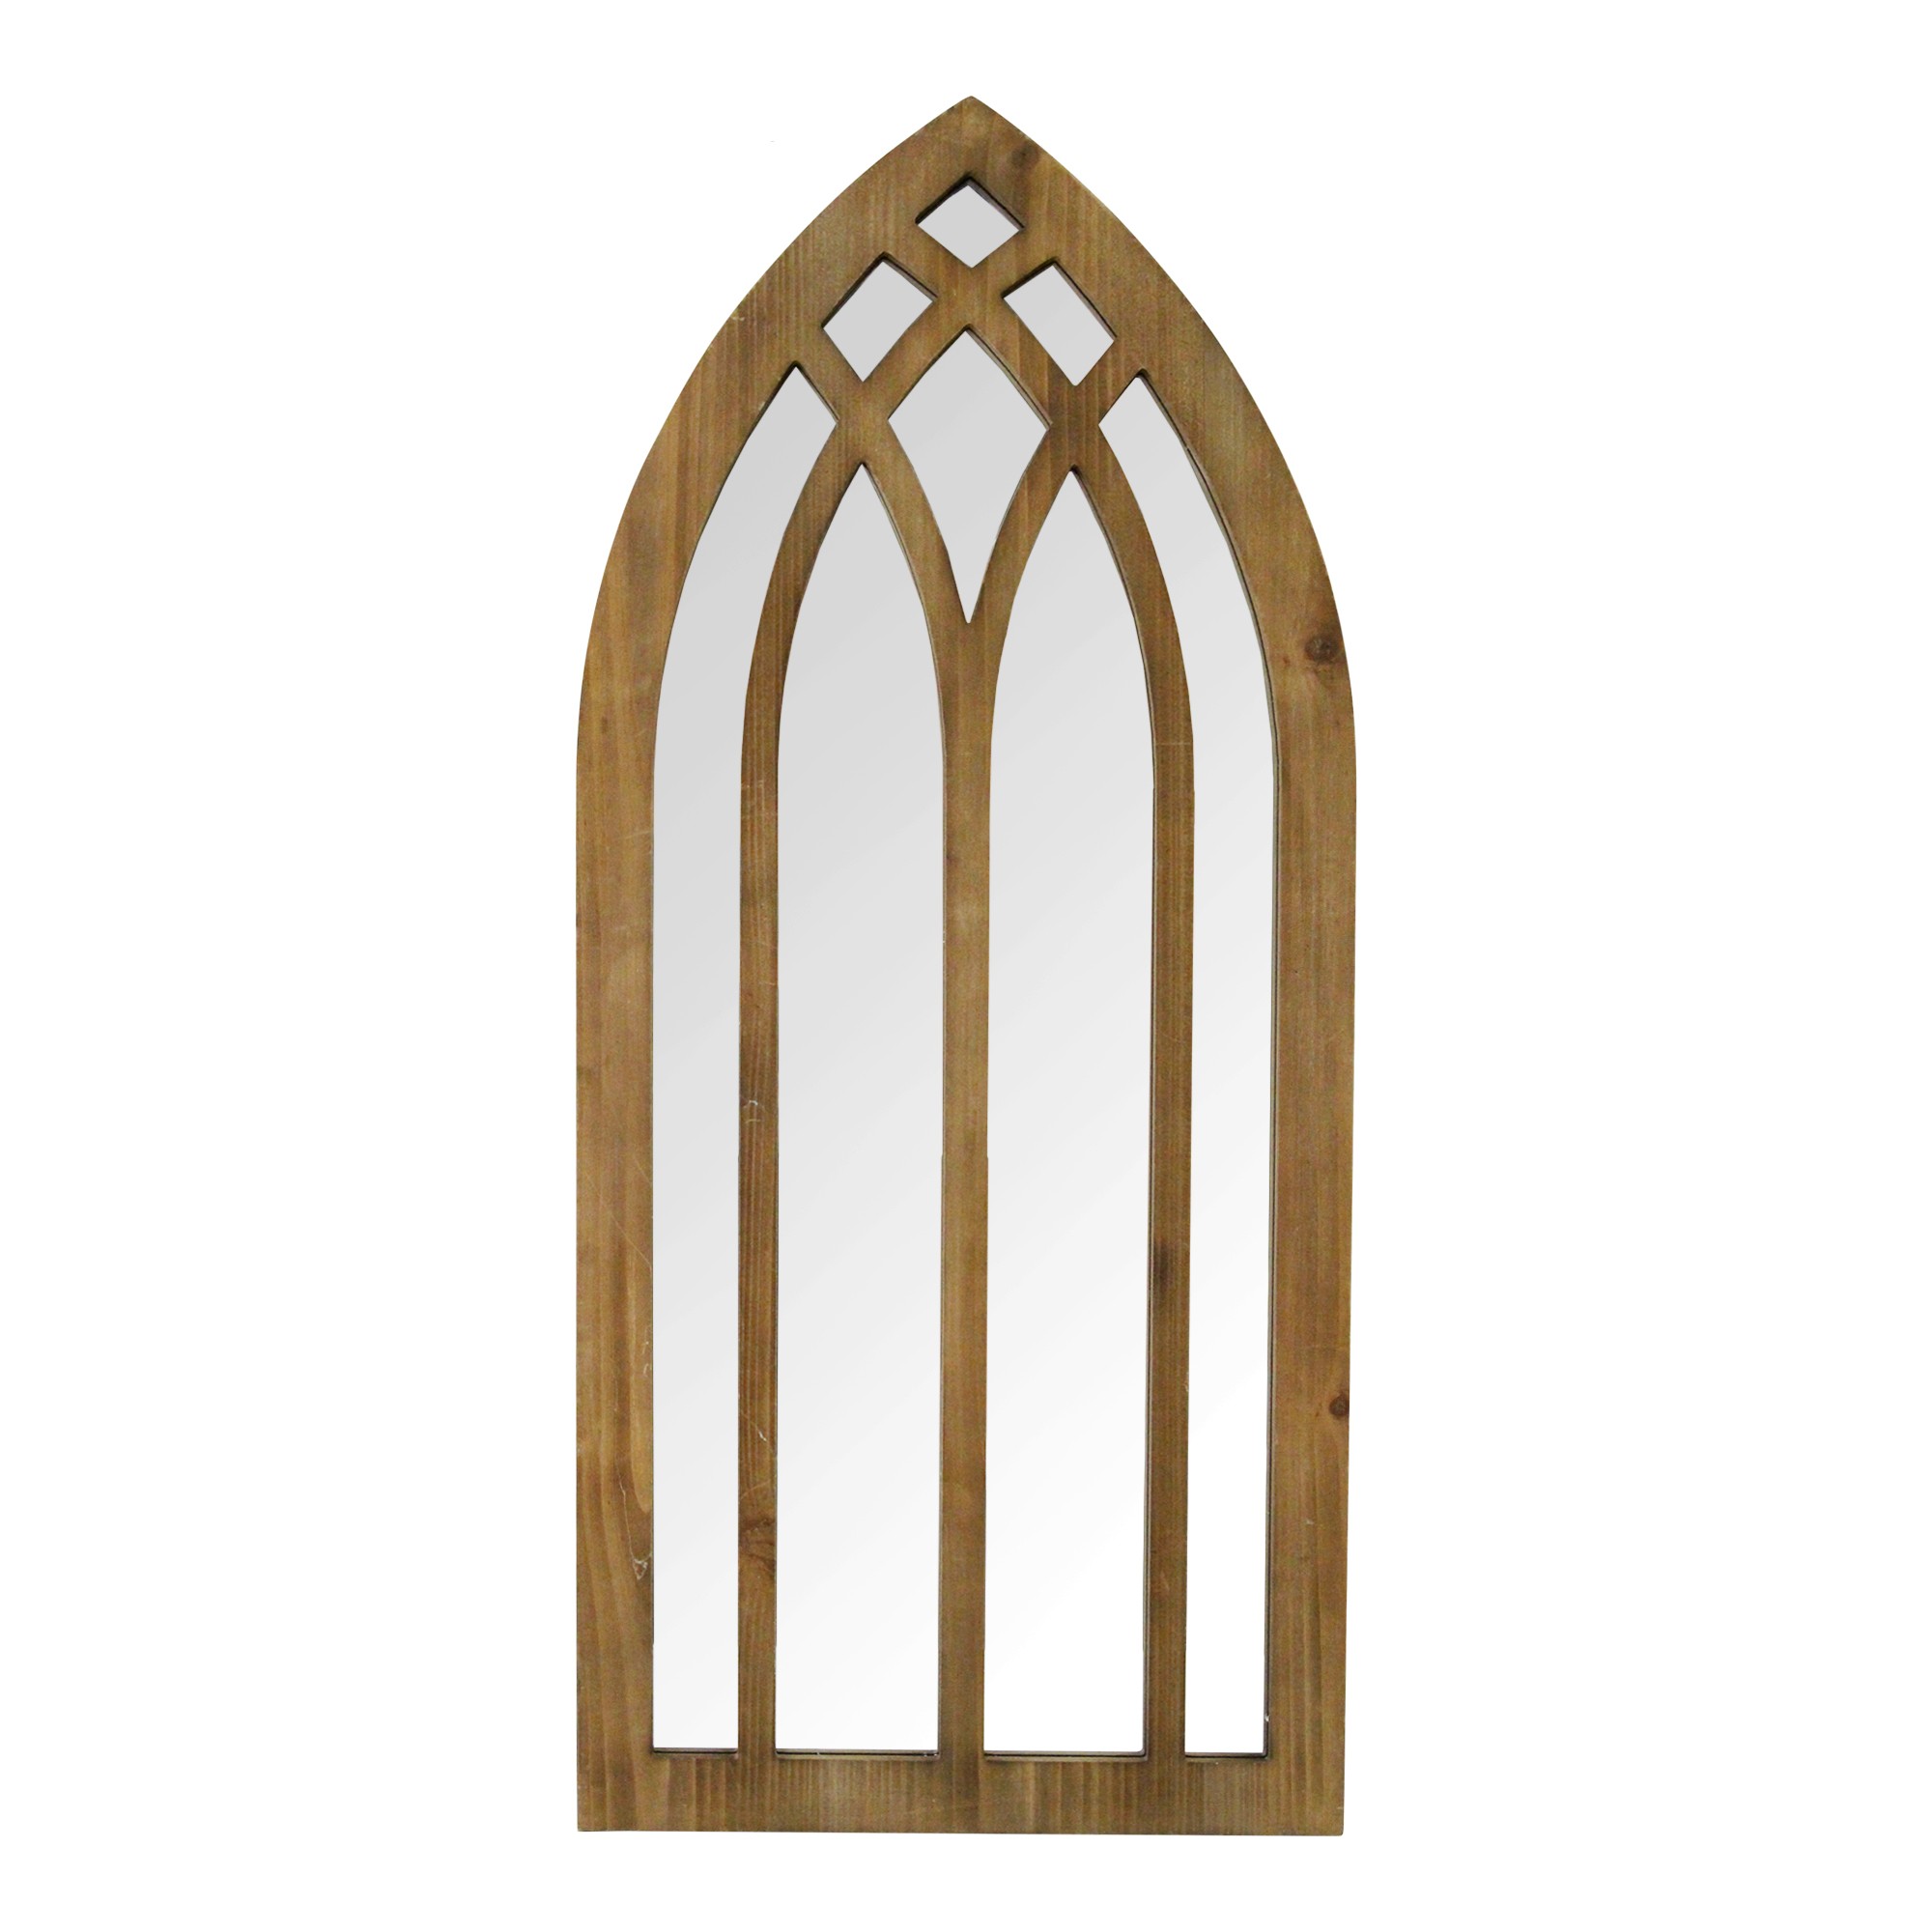 36" Gothic Inspired Arch Wood Wall Mirror